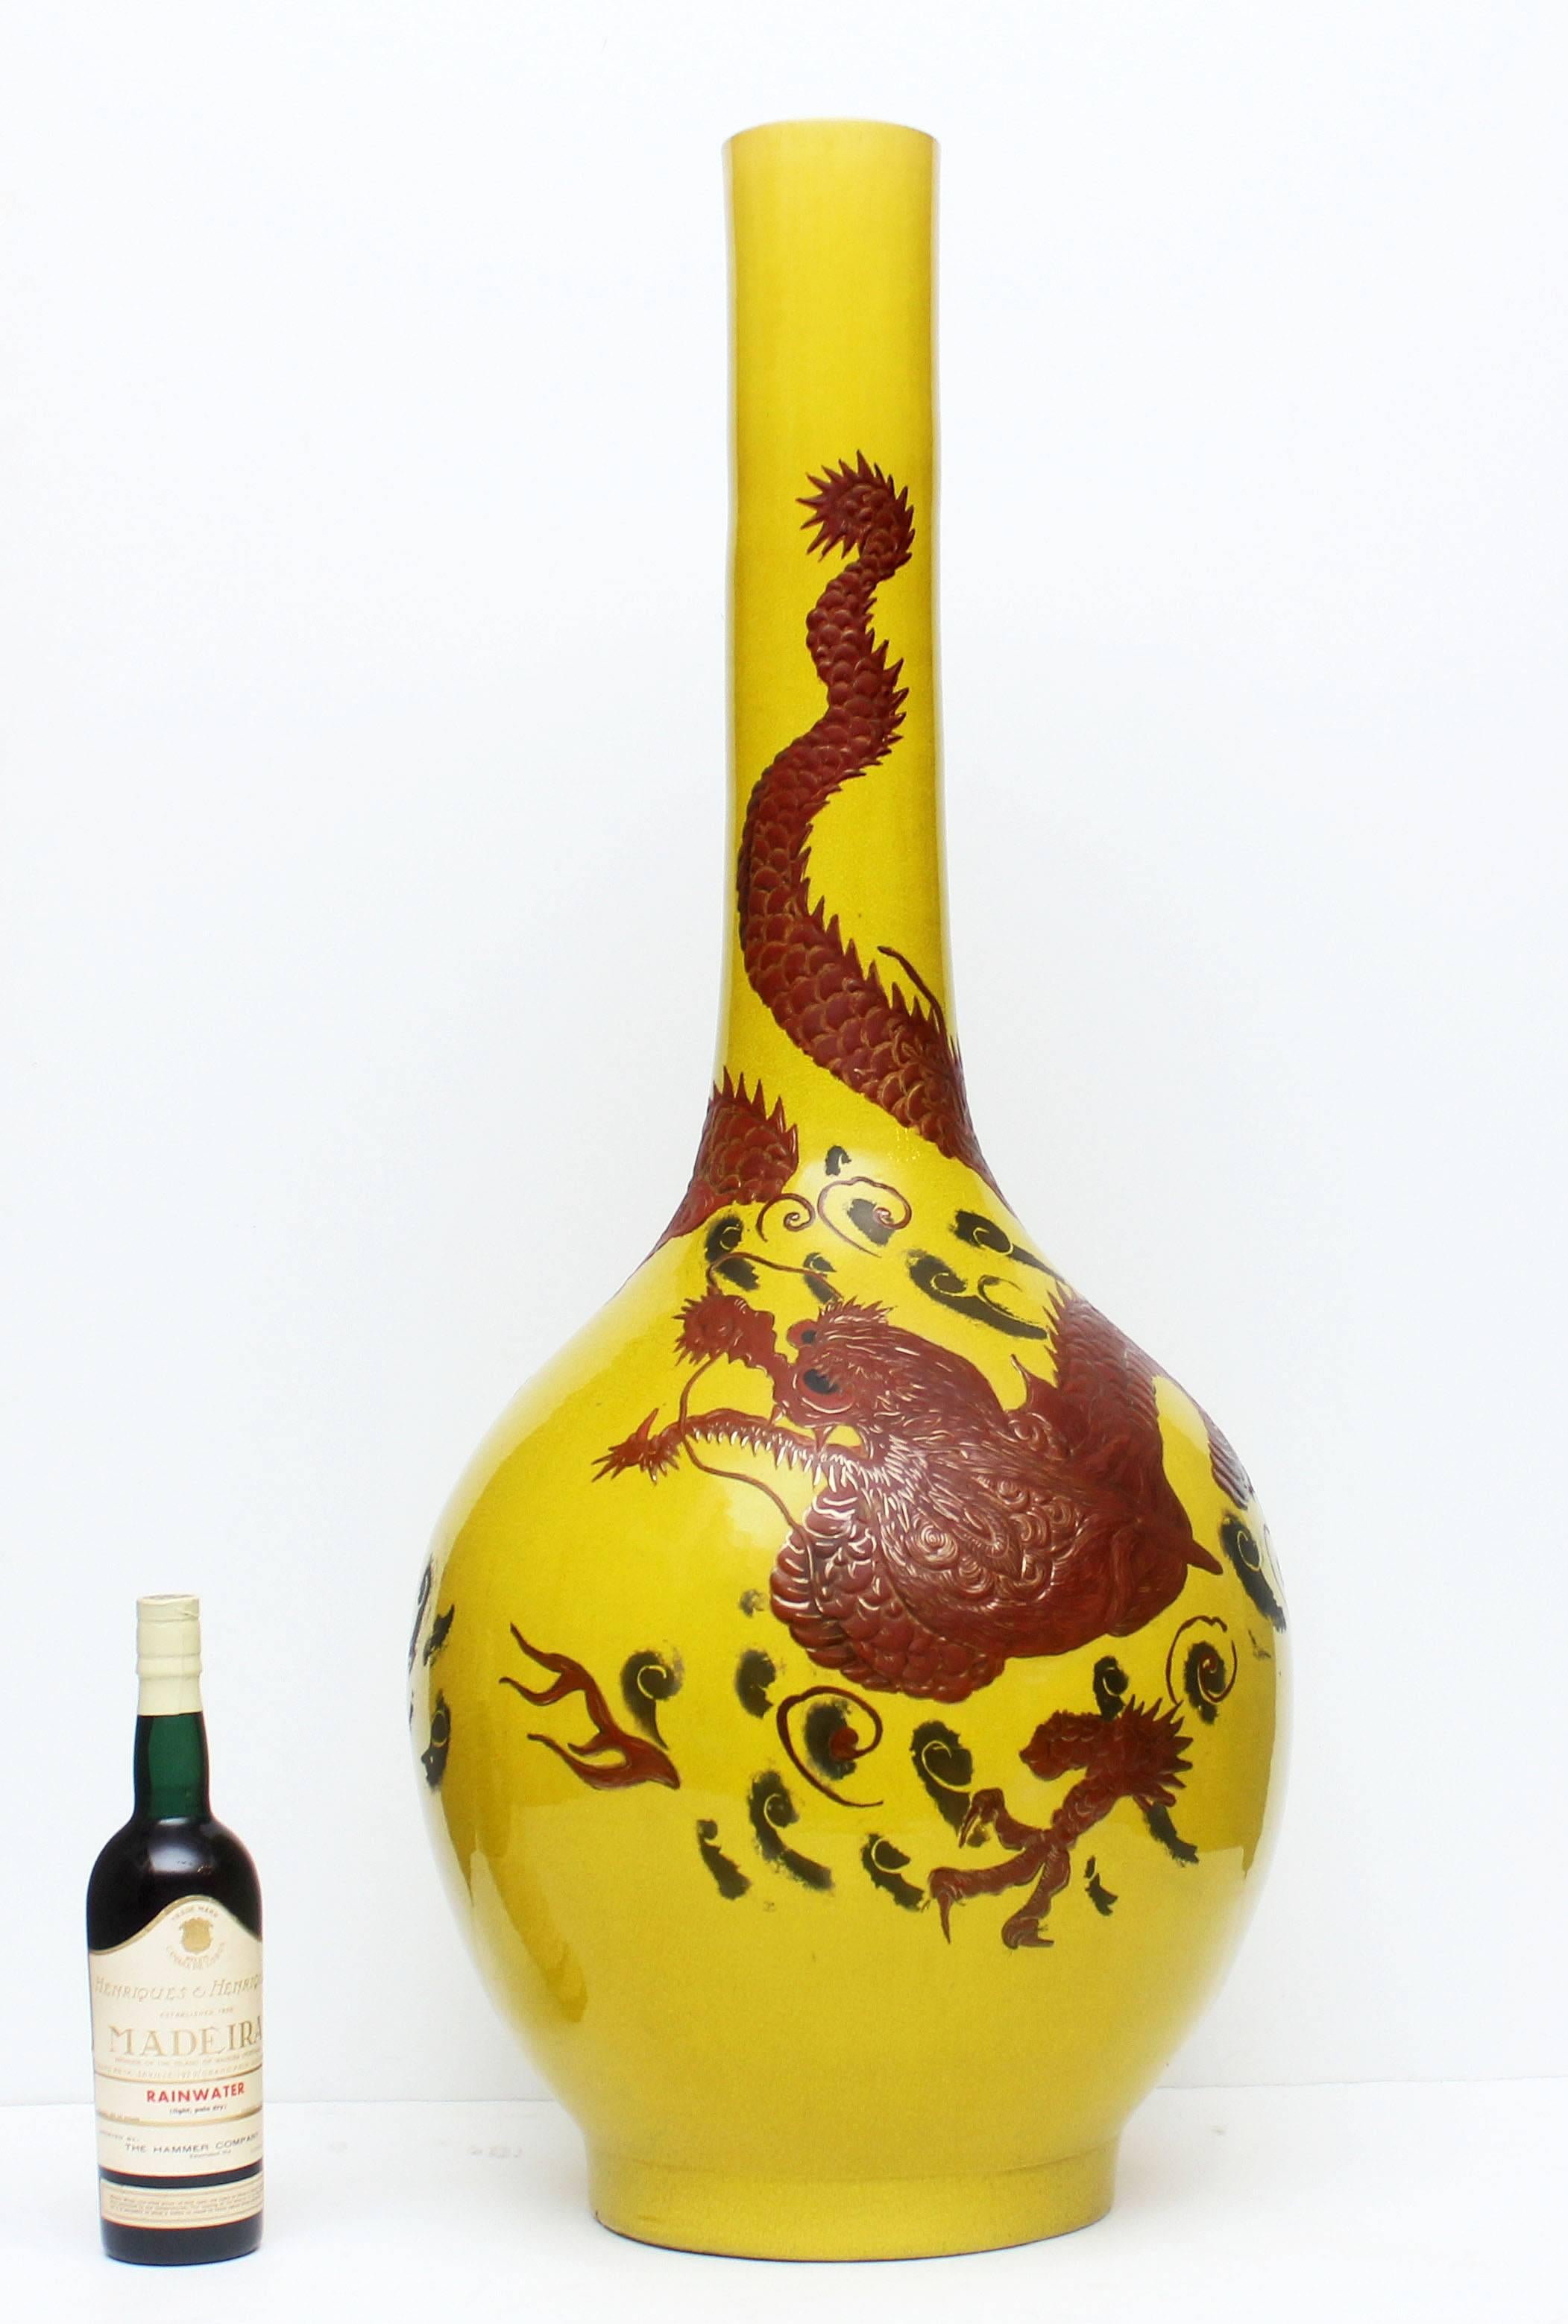 Imperial yellow palace vase decorated with oxblood colored dragon and old gilt highlights, circa 1920.